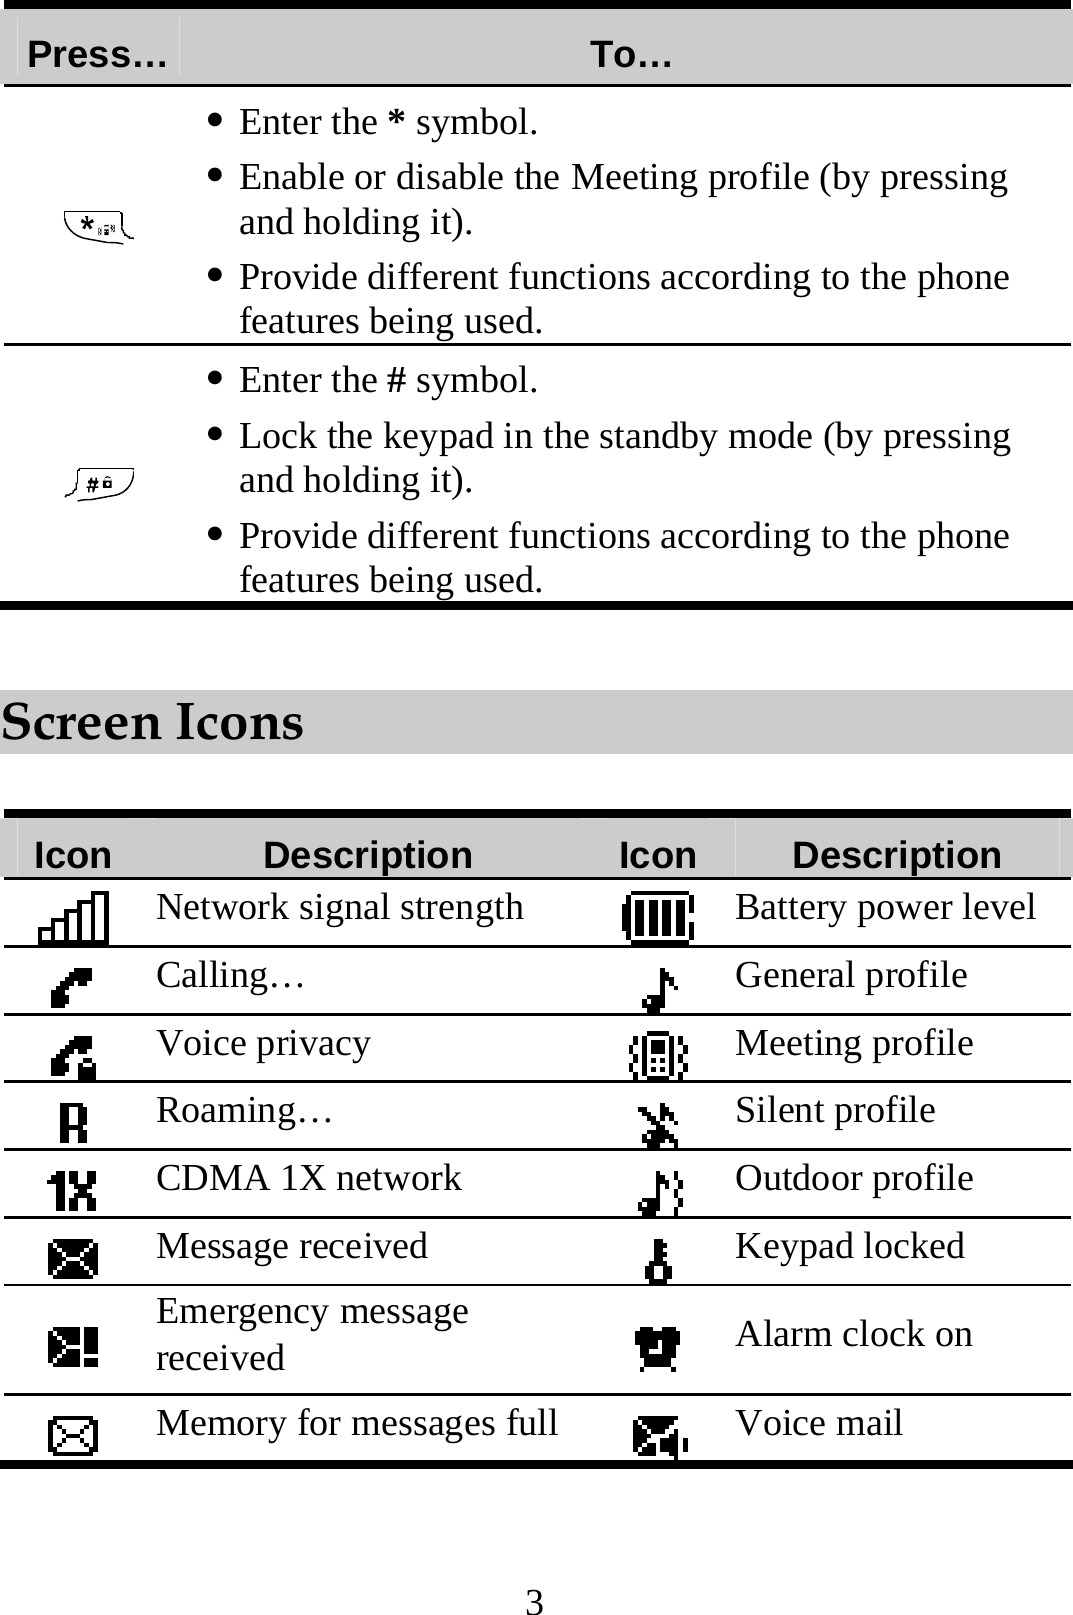 3 Press…  To…  z Enter the * symbol. z Enable or disable the Meeting profile (by pressing and holding it). z Provide different functions according to the phone features being used.  z Enter the # symbol. z Lock the keypad in the standby mode (by pressing and holding it). z Provide different functions according to the phone features being used.  Screen Icons  Icon  Description  Icon Description  Network signal strength  Battery power level Calling…  General profile  Voice privacy  Meeting profile  Roaming…  Silent profile  CDMA 1X network  Outdoor profile  Message received   Keypad locked  Emergency message received   Alarm clock on  Memory for messages full Voice mail  